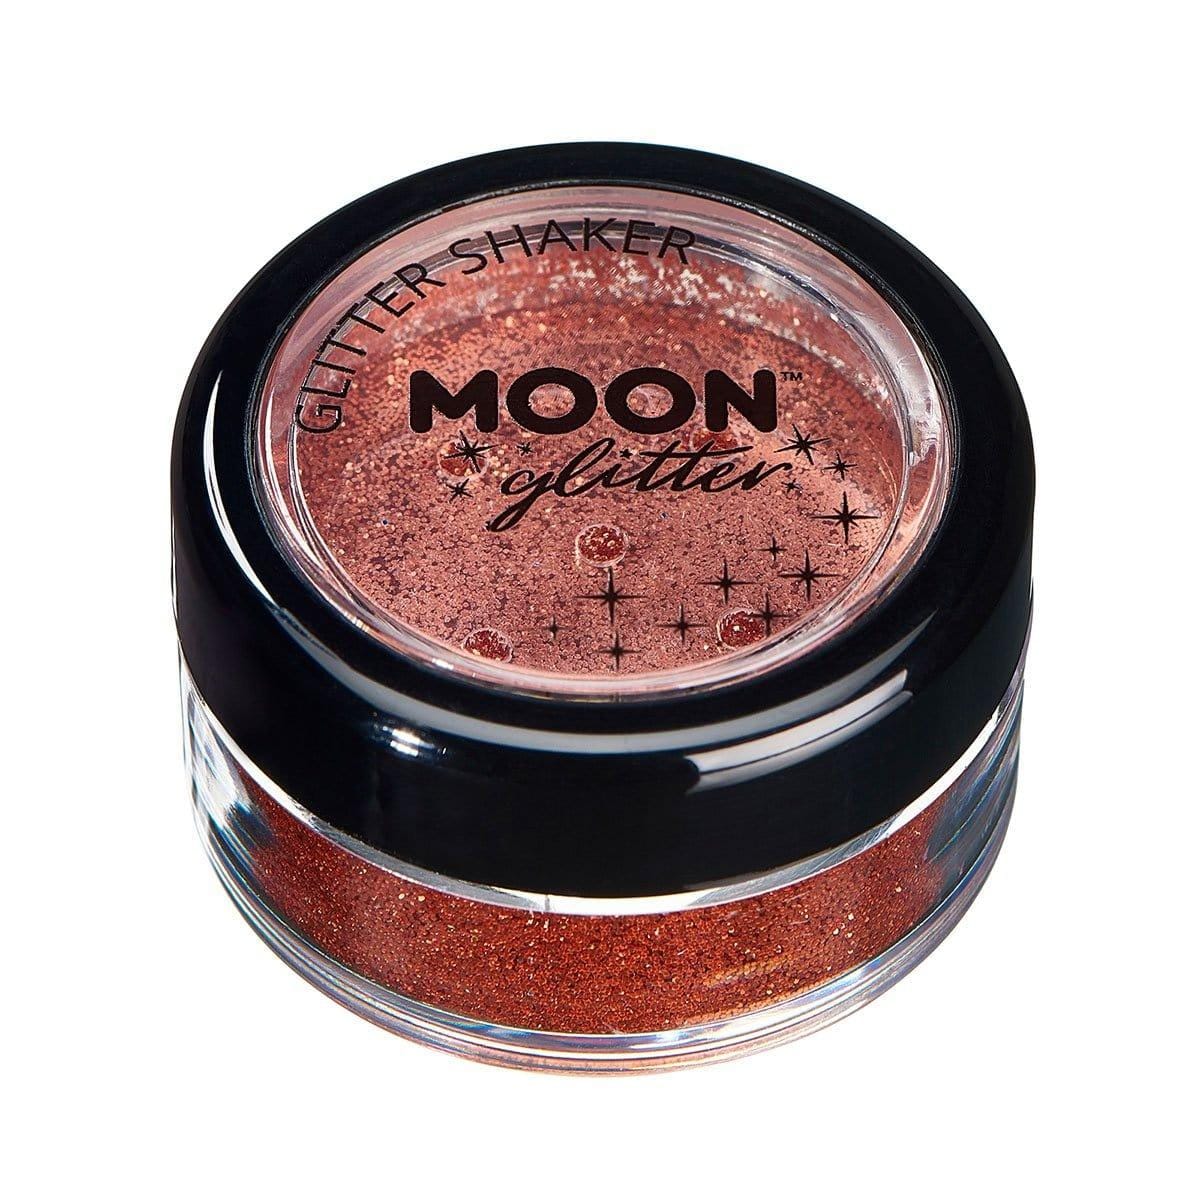 Buy Costume Accessories Moon copper bronze fine glitter sold at Party Expert